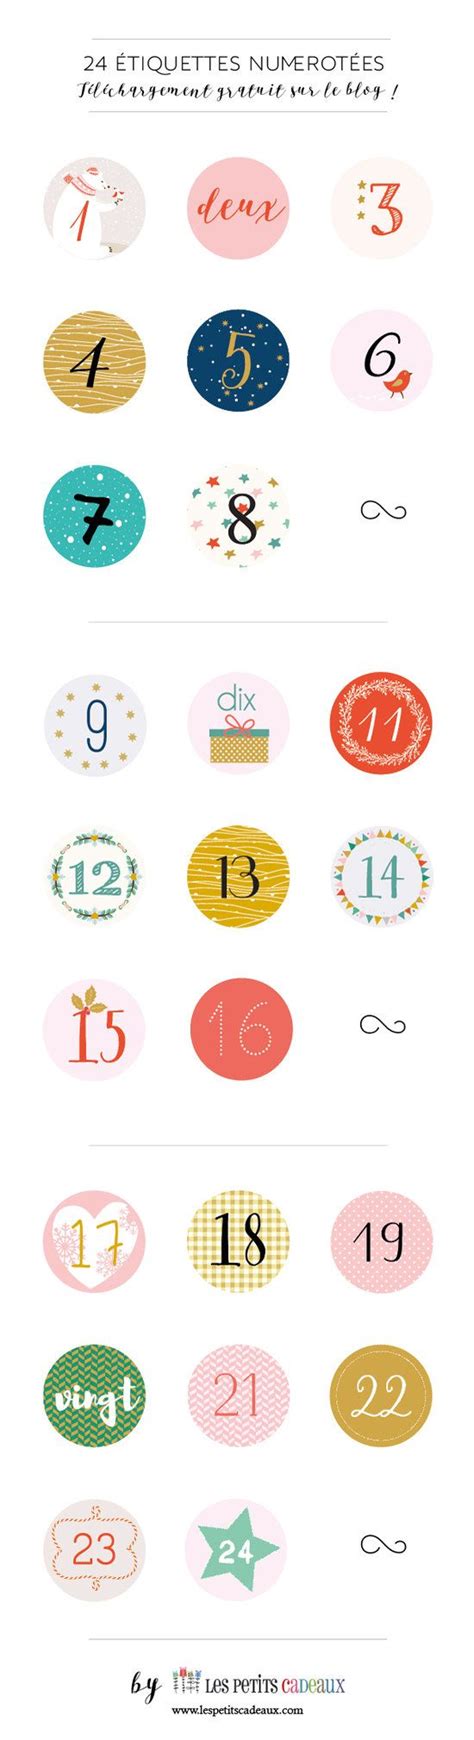 images   printables    pinterest gift tags